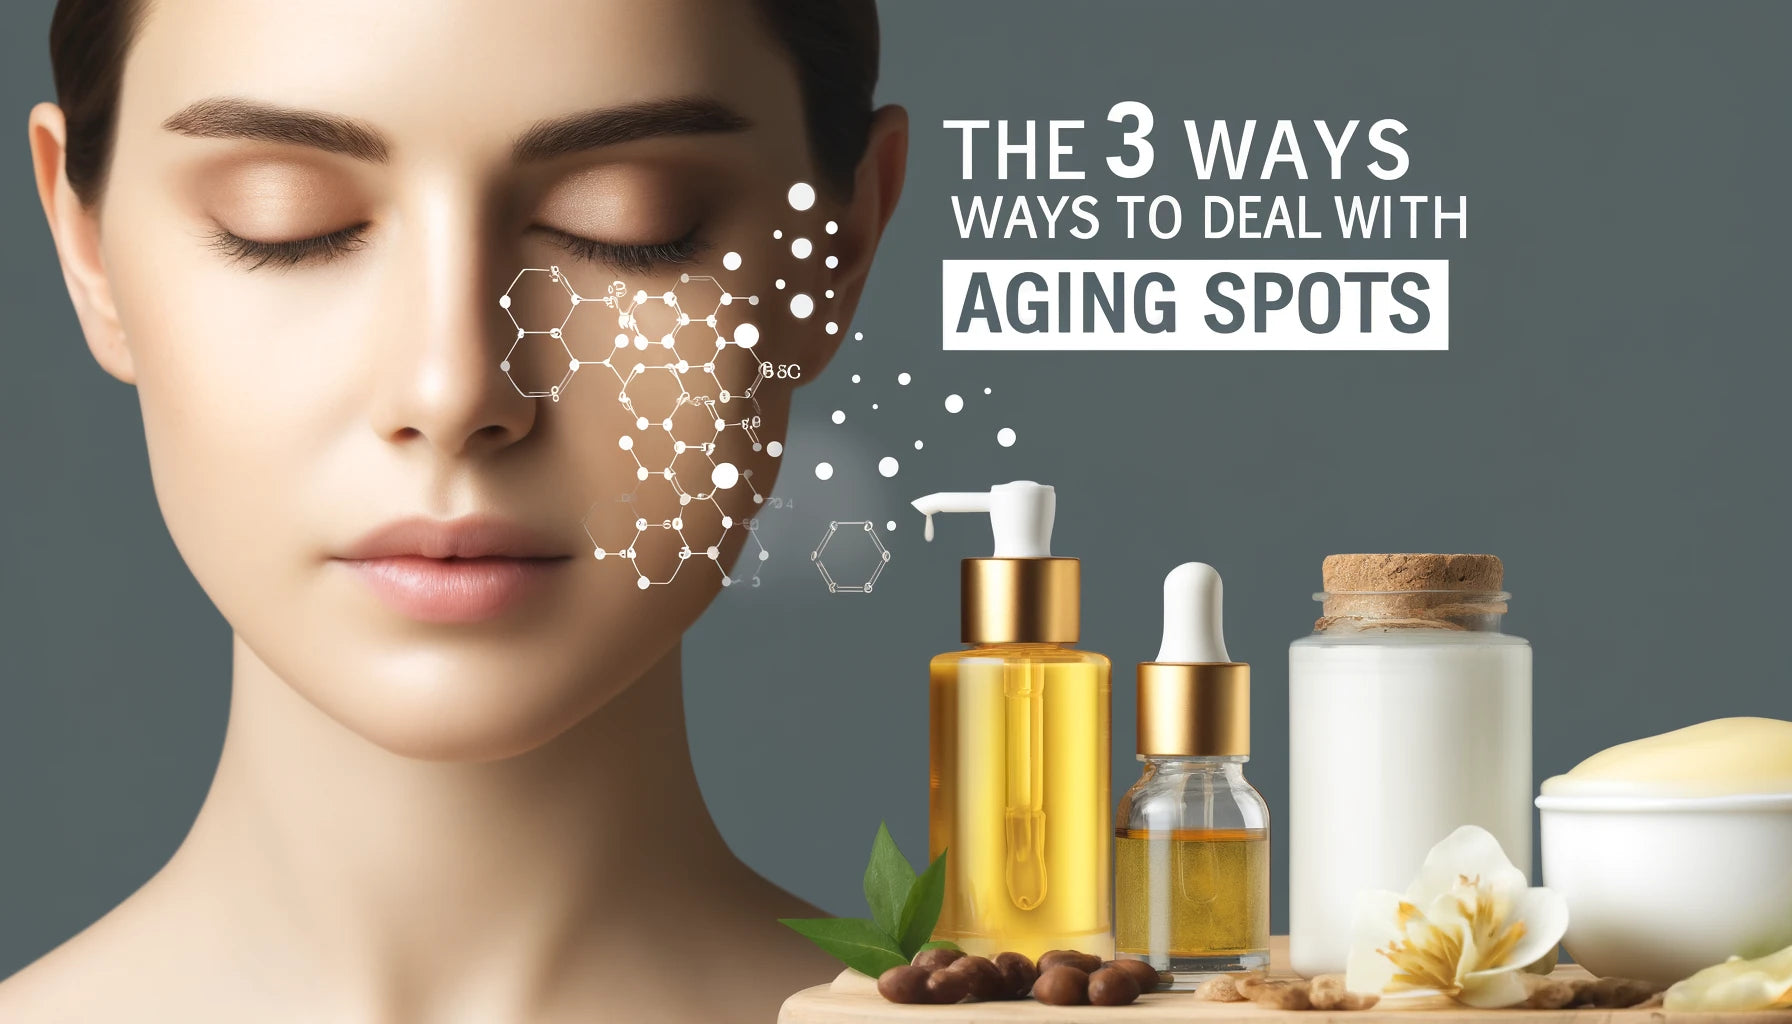 The 3 Best Ways to Deal with Aging Spots